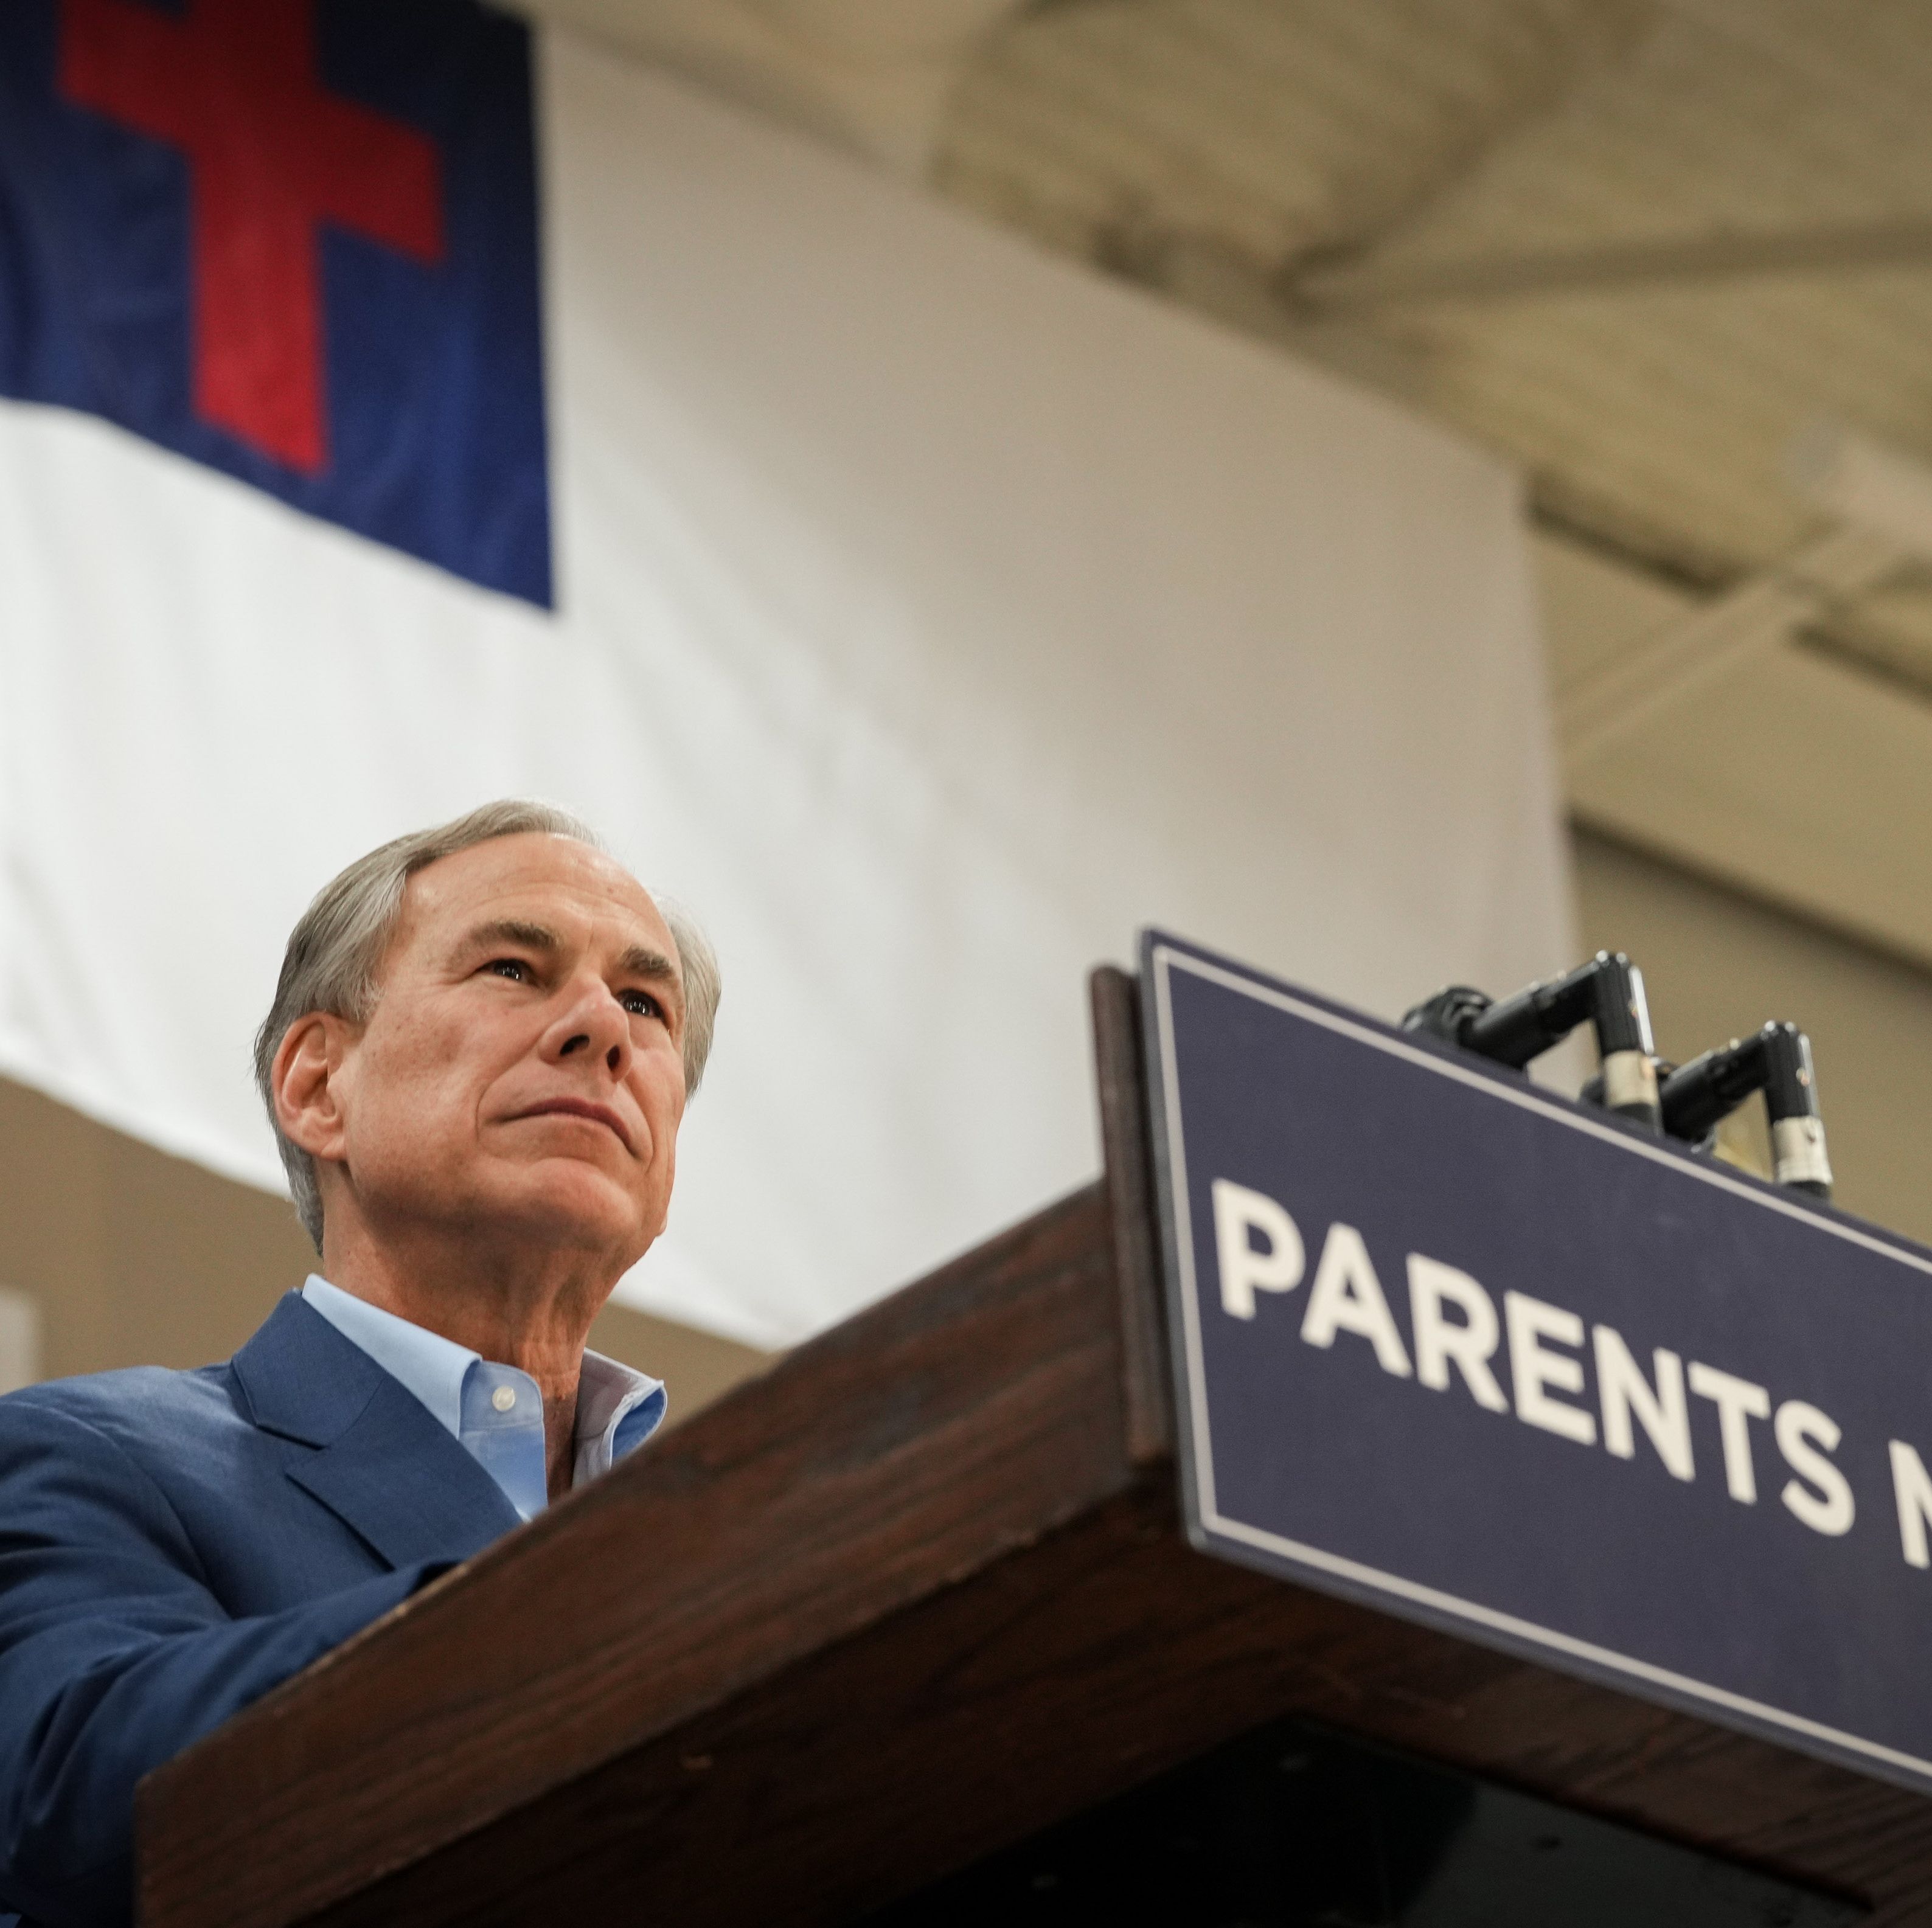 Greg Abbott and Ken Paxton Have Pulled The Wool Over The Eyes of Texas